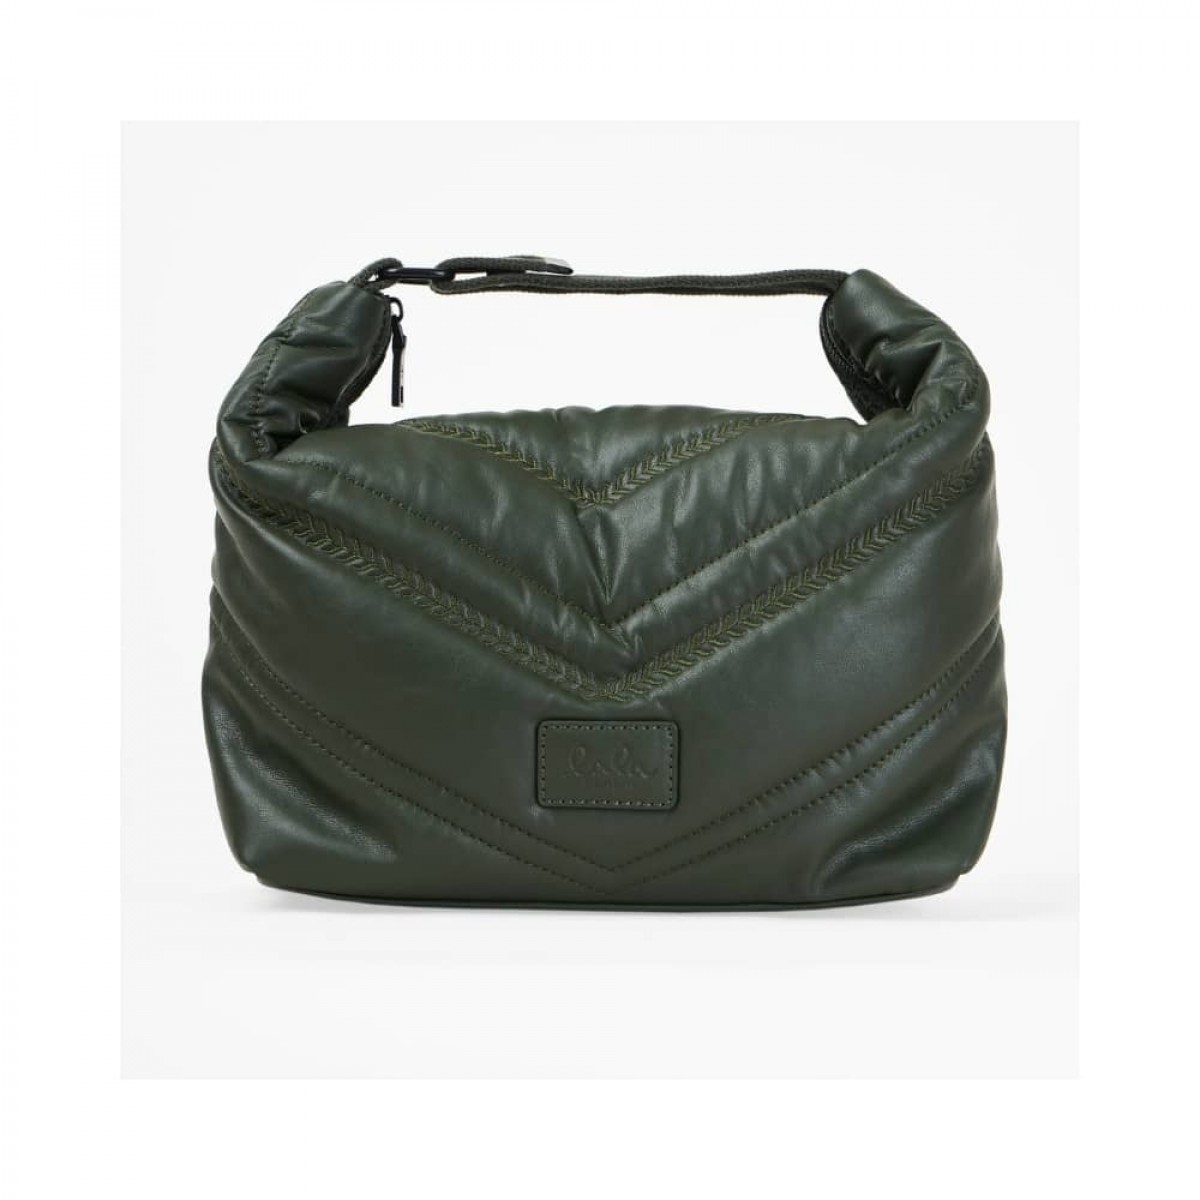 cosmetic bag camilla - olive - front